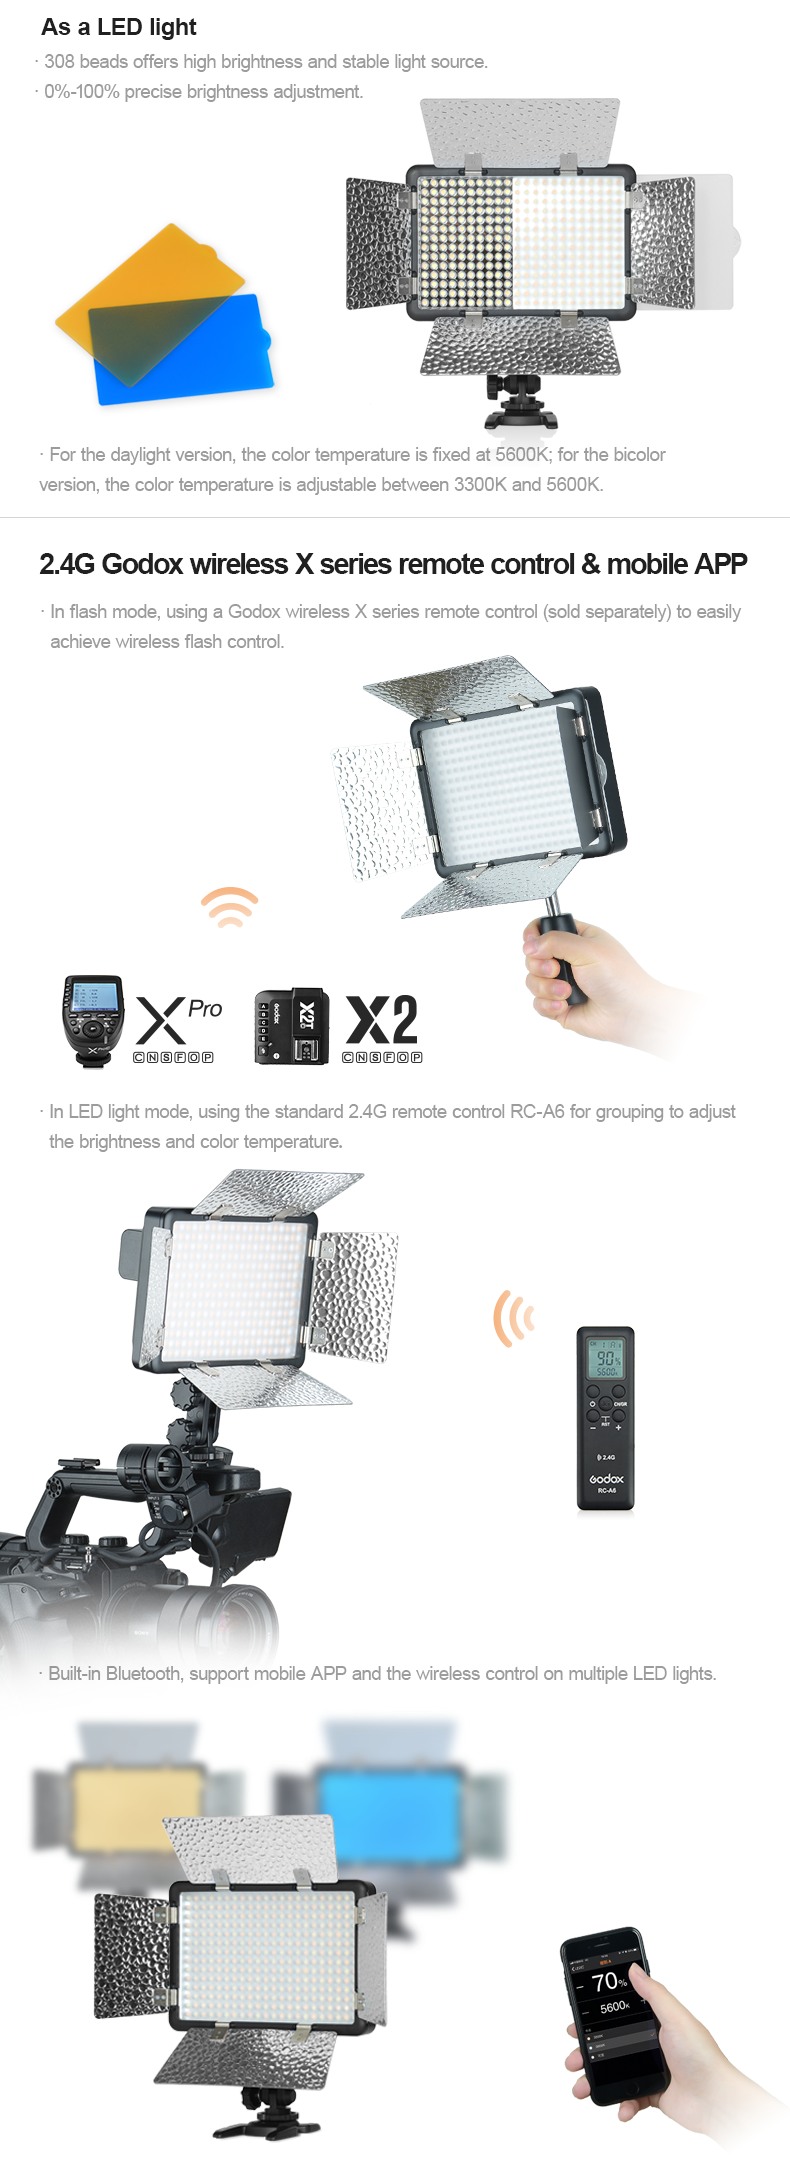 LF308 LED flash light. Featured with both flash and continous light LED. As a LED light. 2.4 Godox X wireless system remote control and mobile app